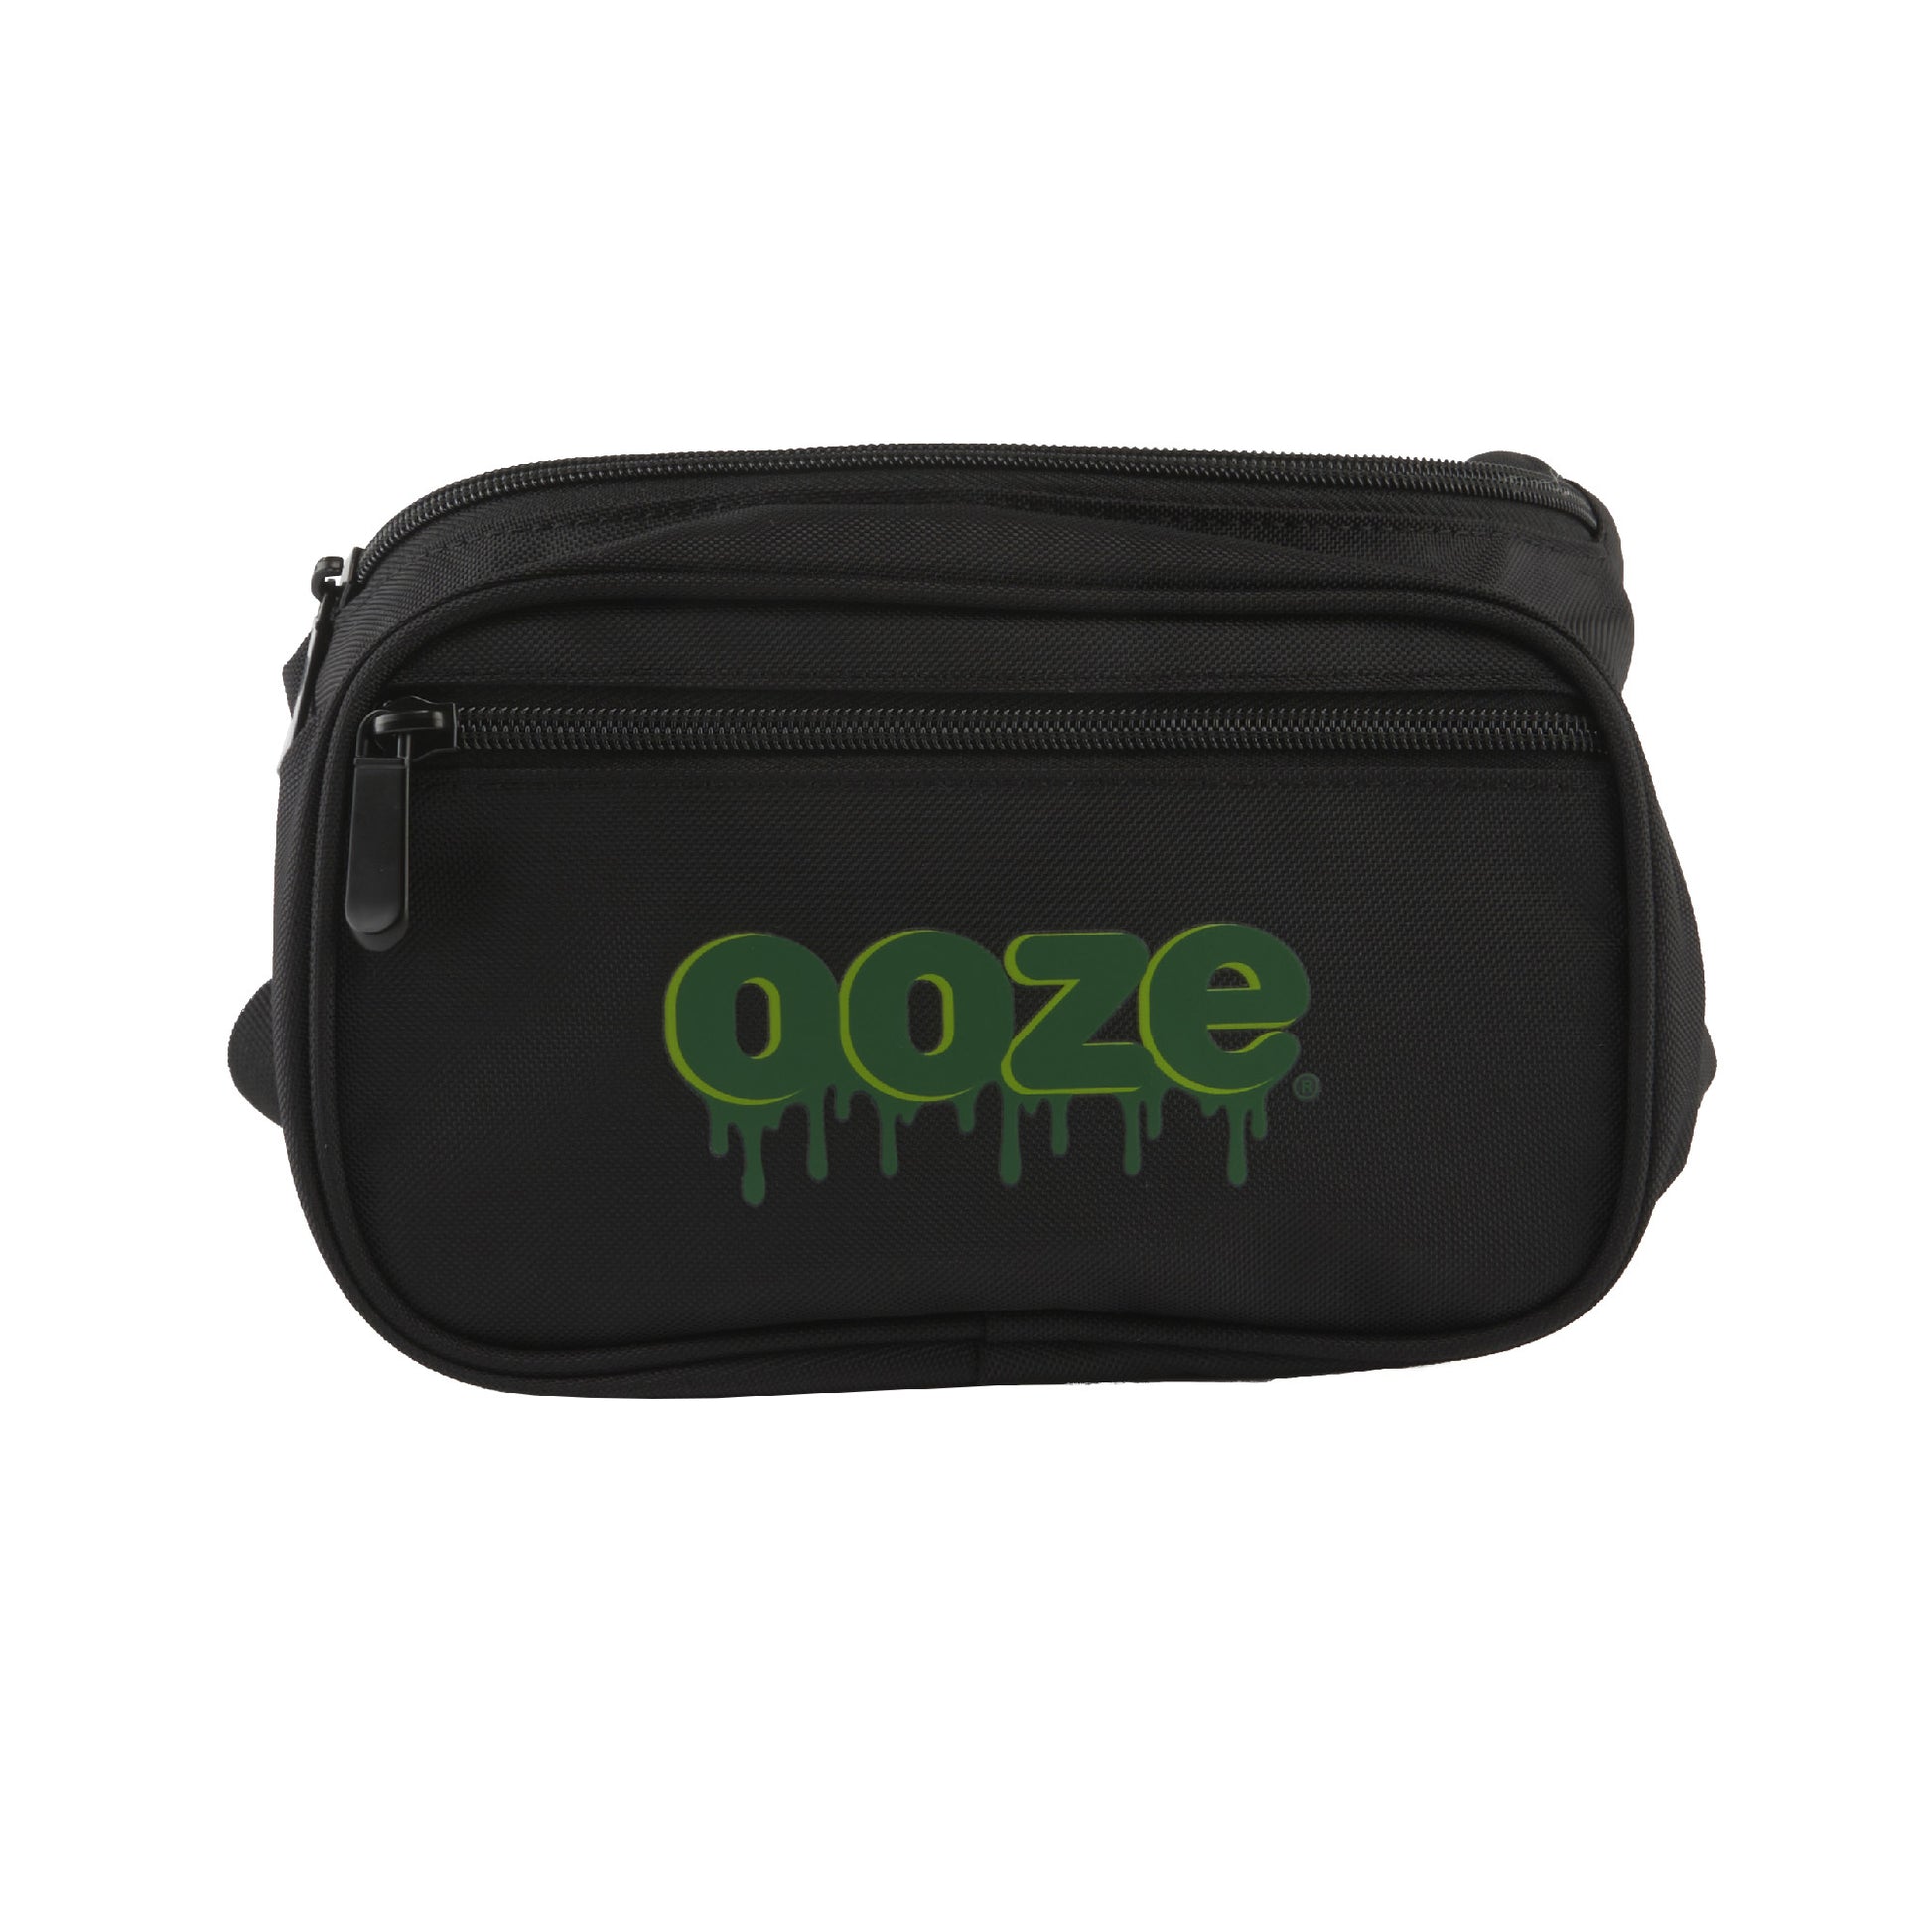 The front of the Ooze black Logo Fanny Pack. The adjustable strap is hidden behind the bag